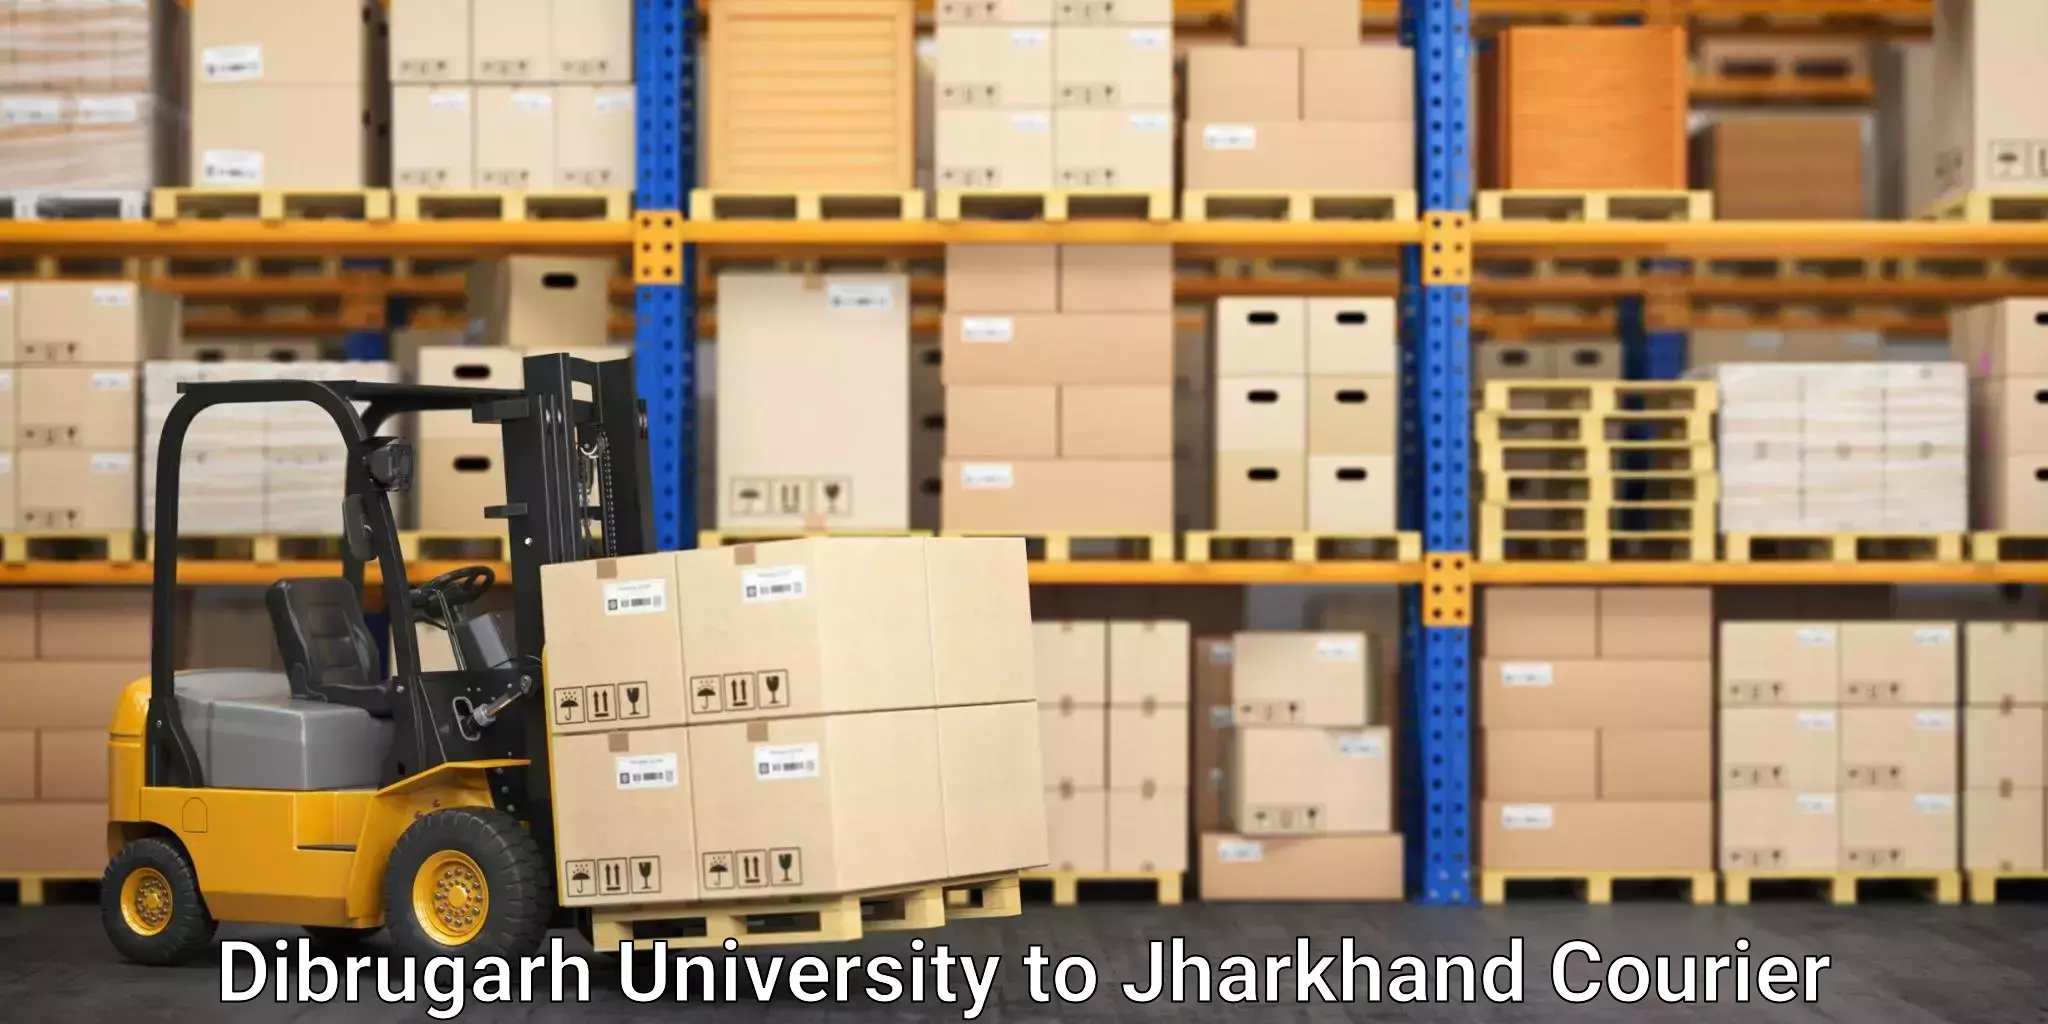 Professional courier services Dibrugarh University to Ranchi